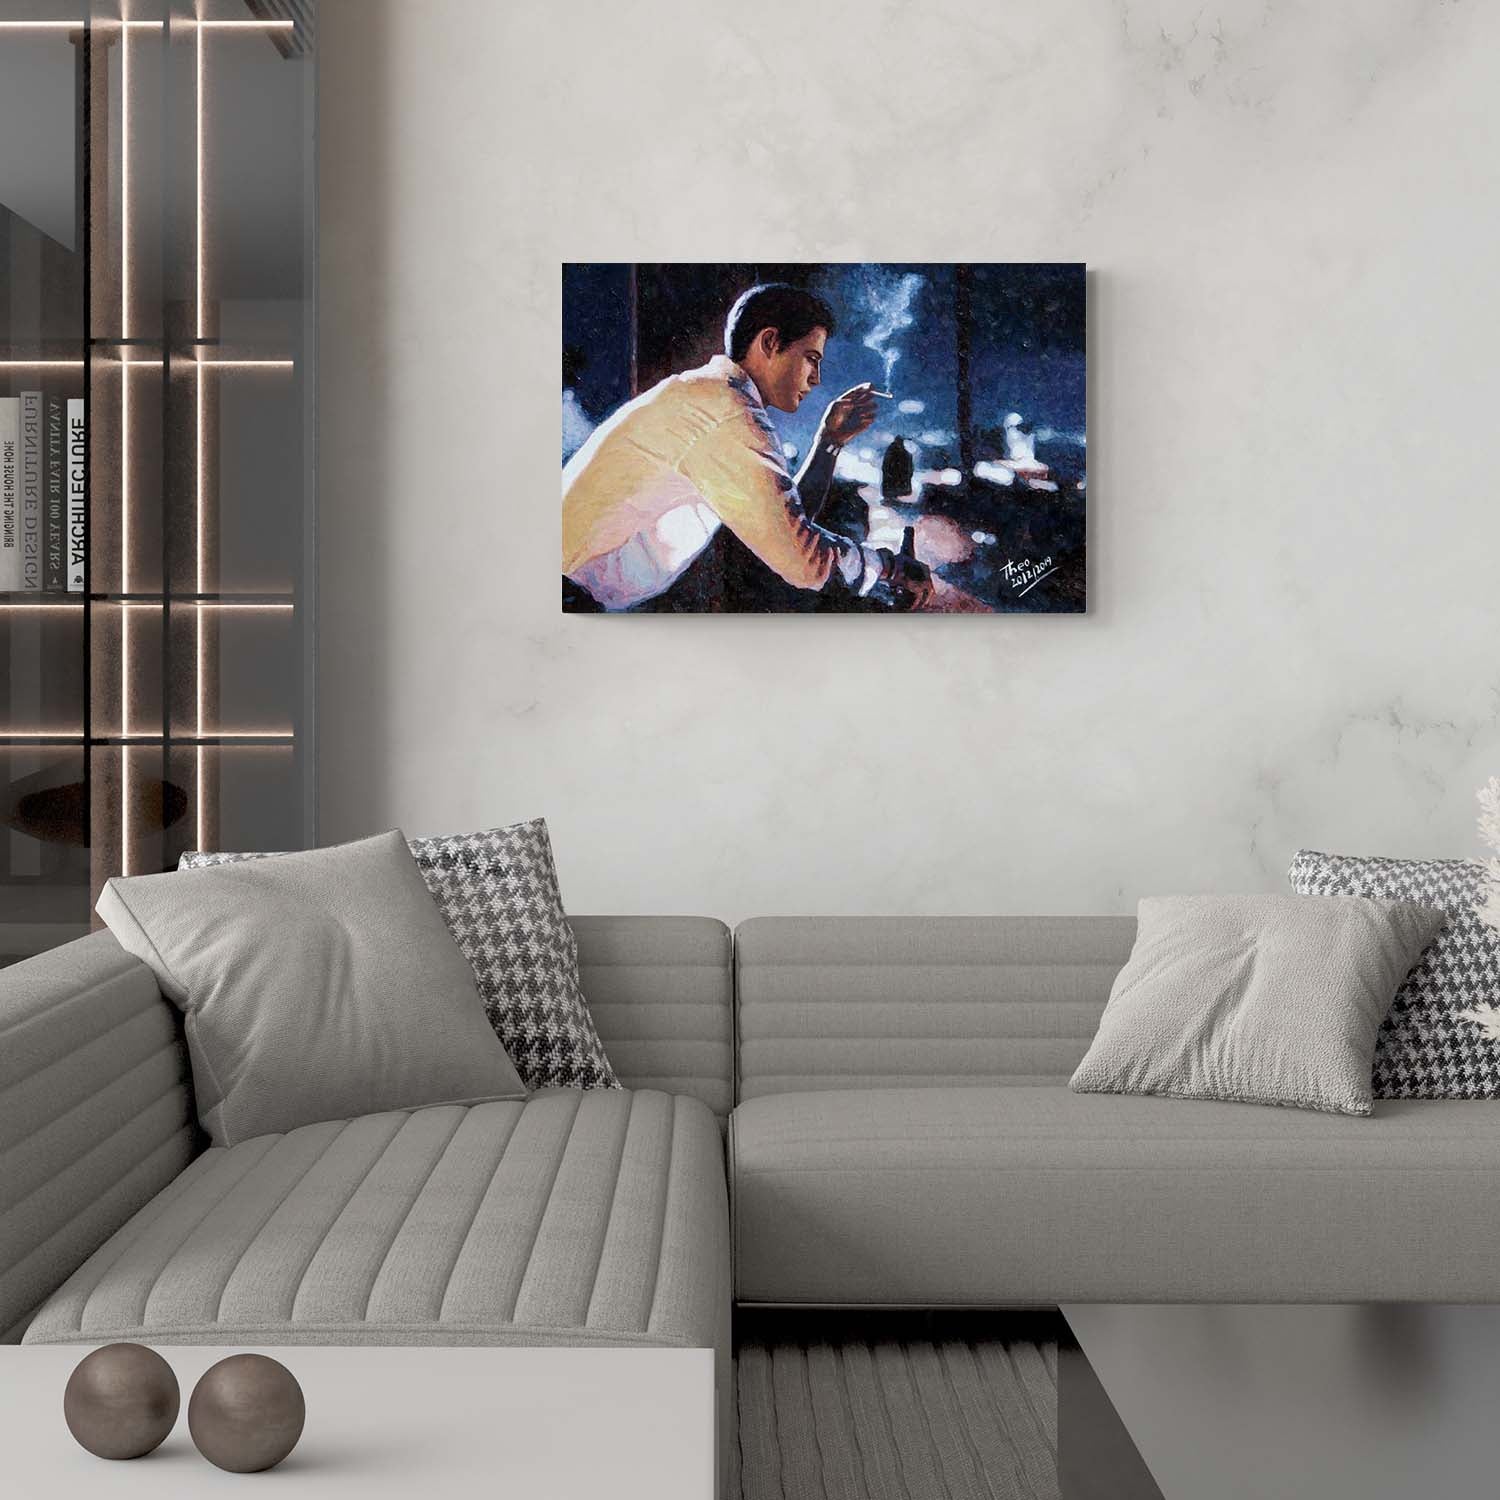 Canvas print of an Art Noir oil painting by Theo Michael titled Heartbreak Hotel